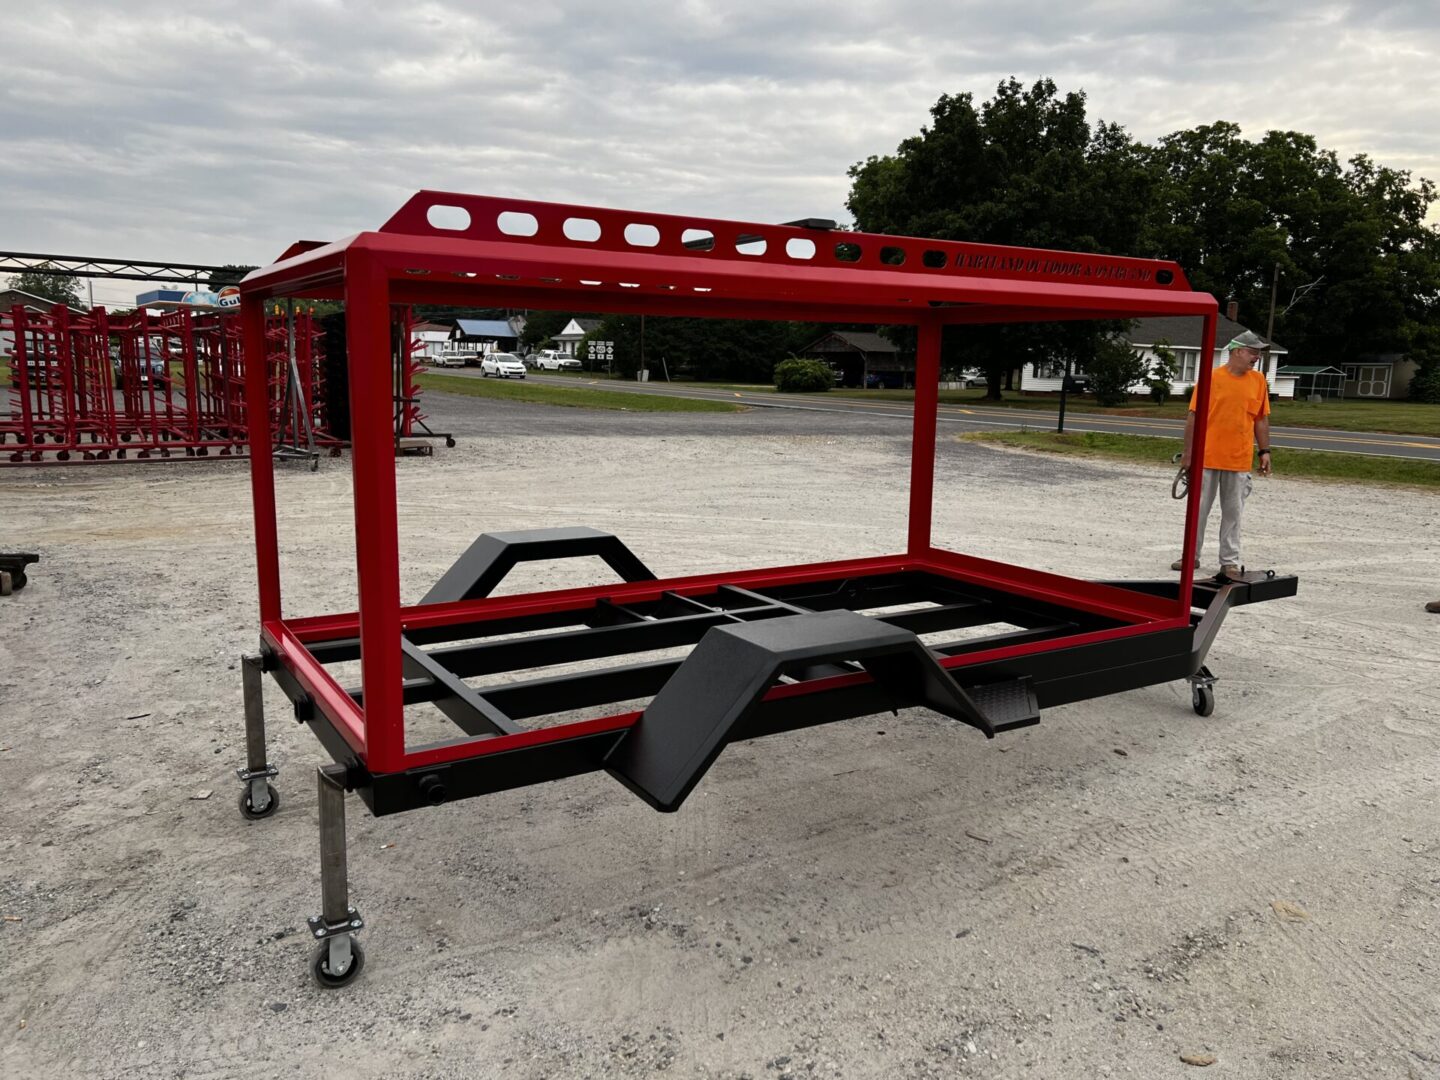 A frame of a red vehicle trailer